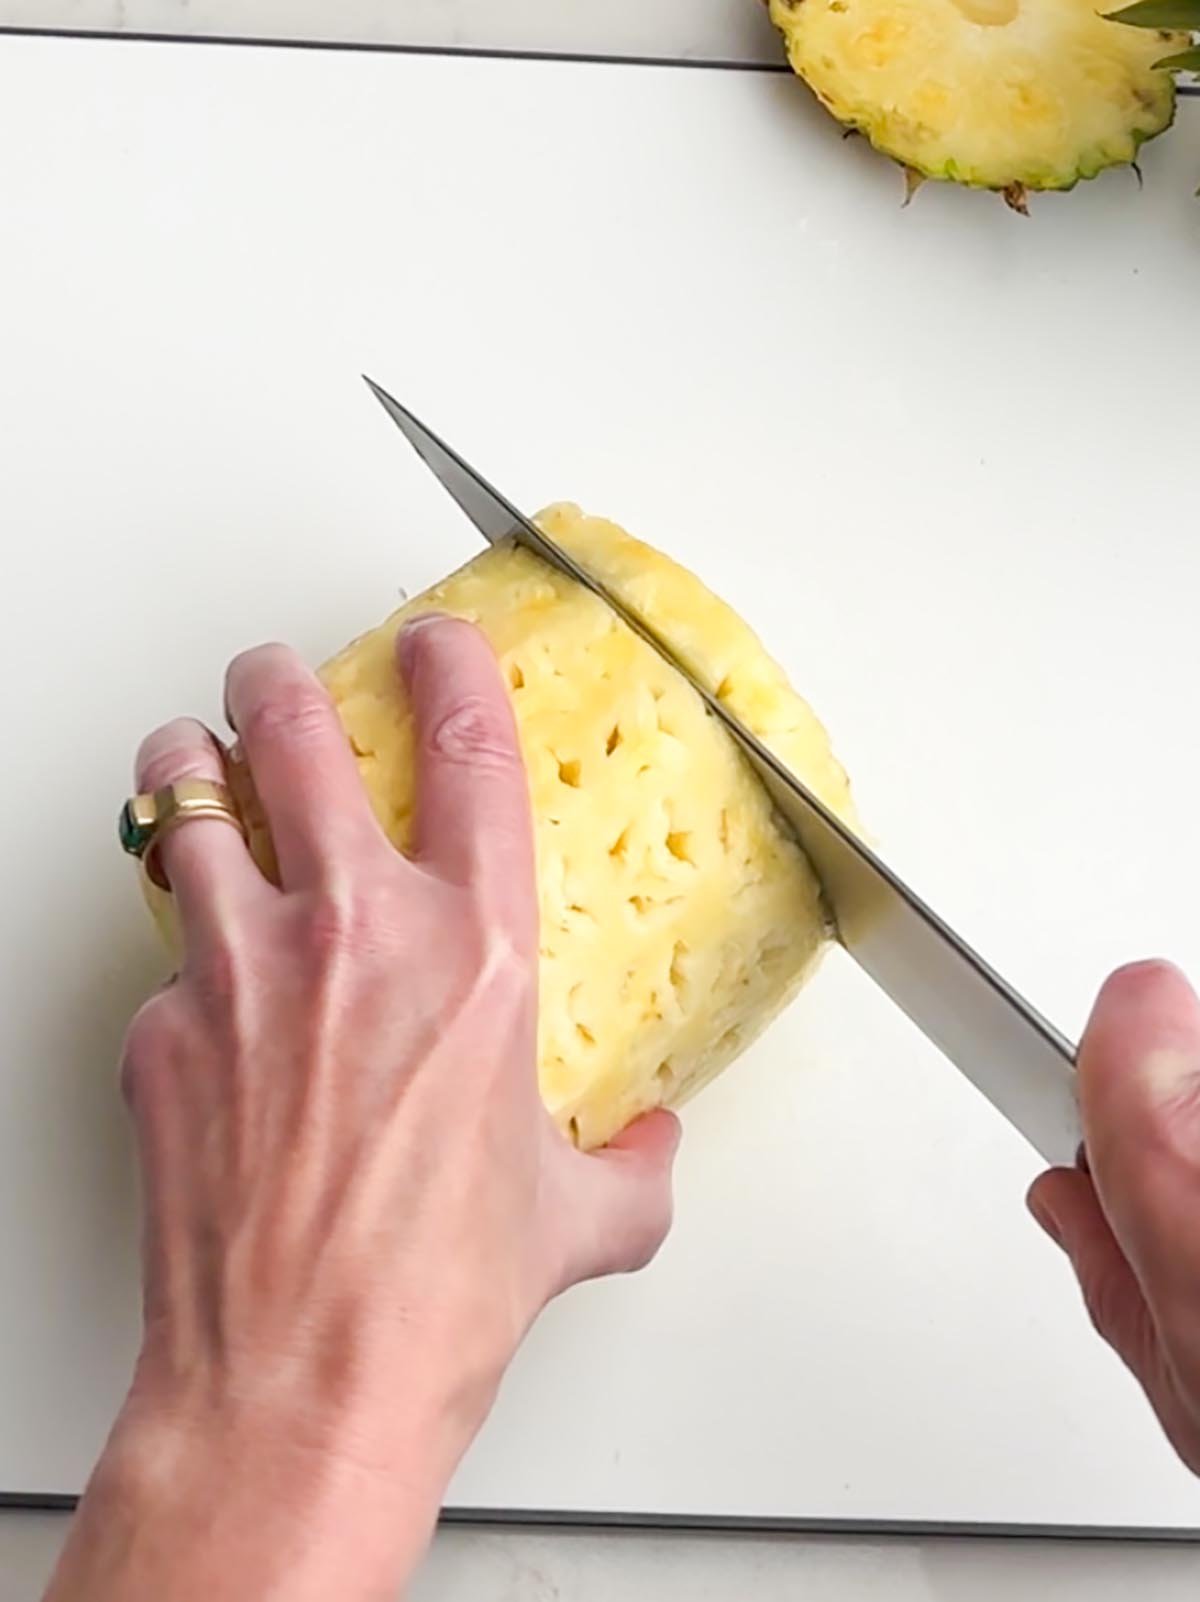 hand holding a knife cutting a pineapple into slices